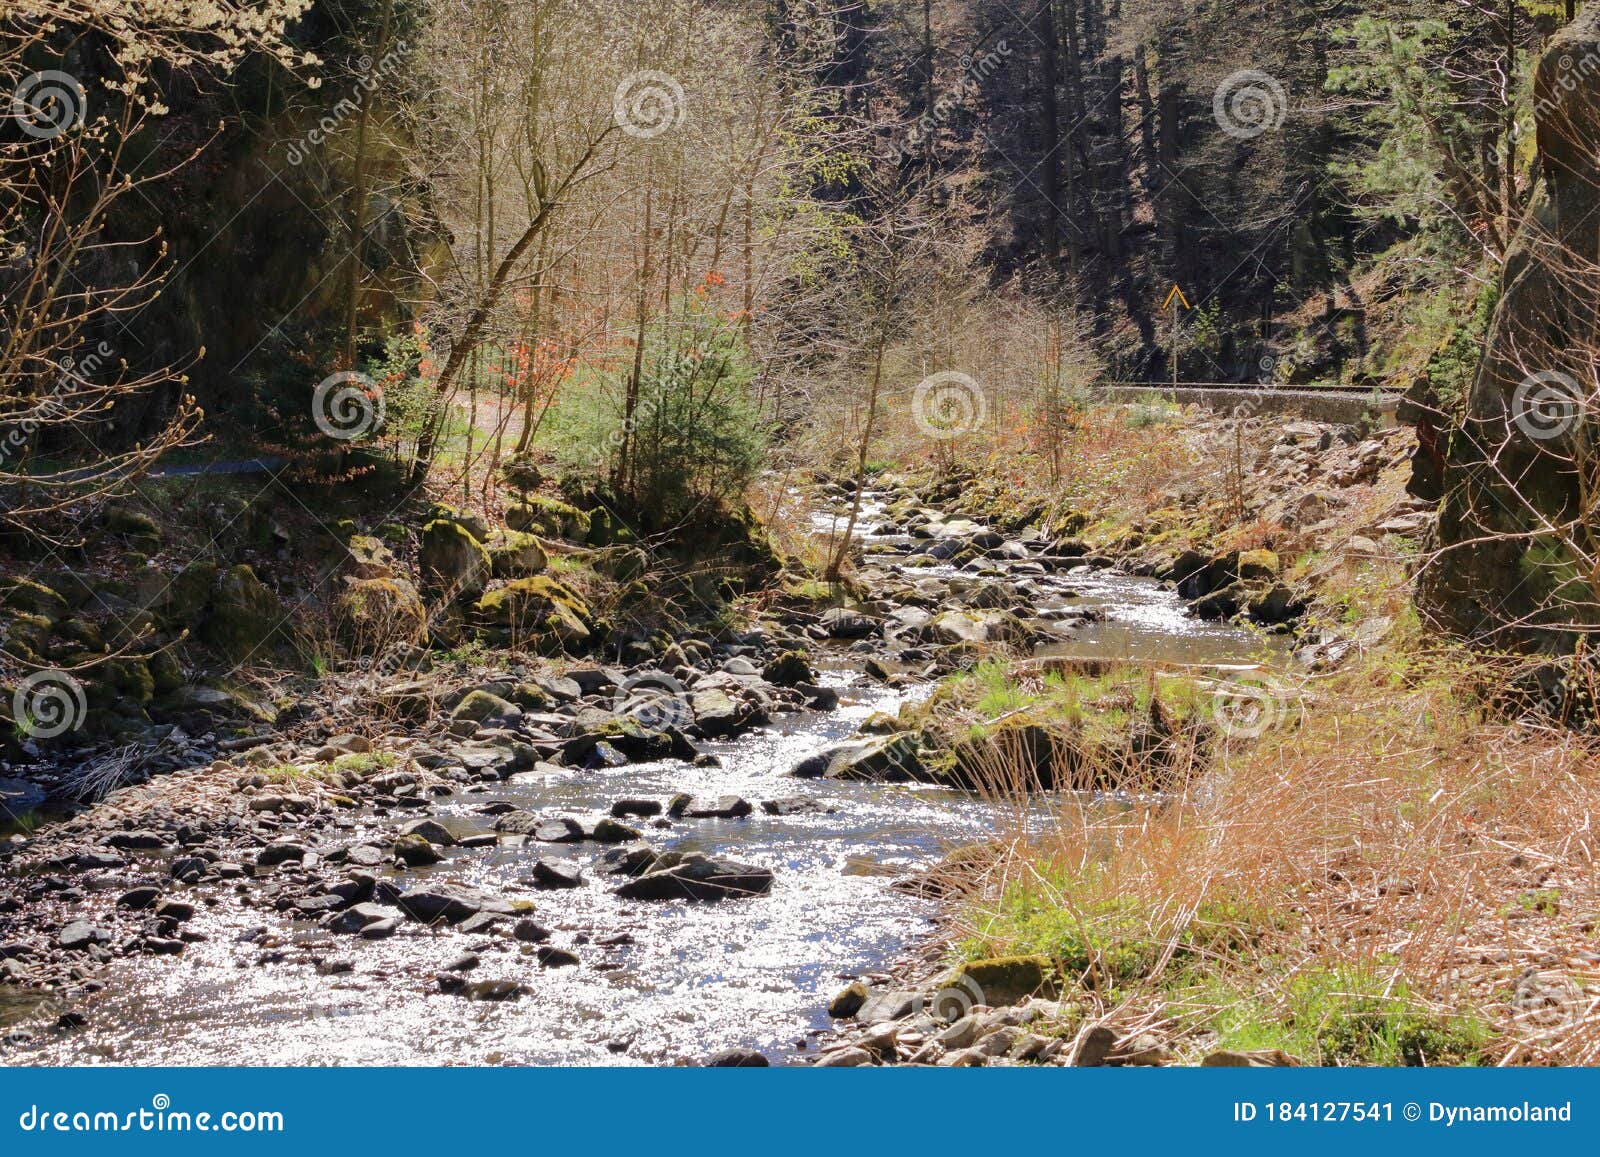 Cascades On A Clear Creek In A Forrest Stock Image Image Of Clear